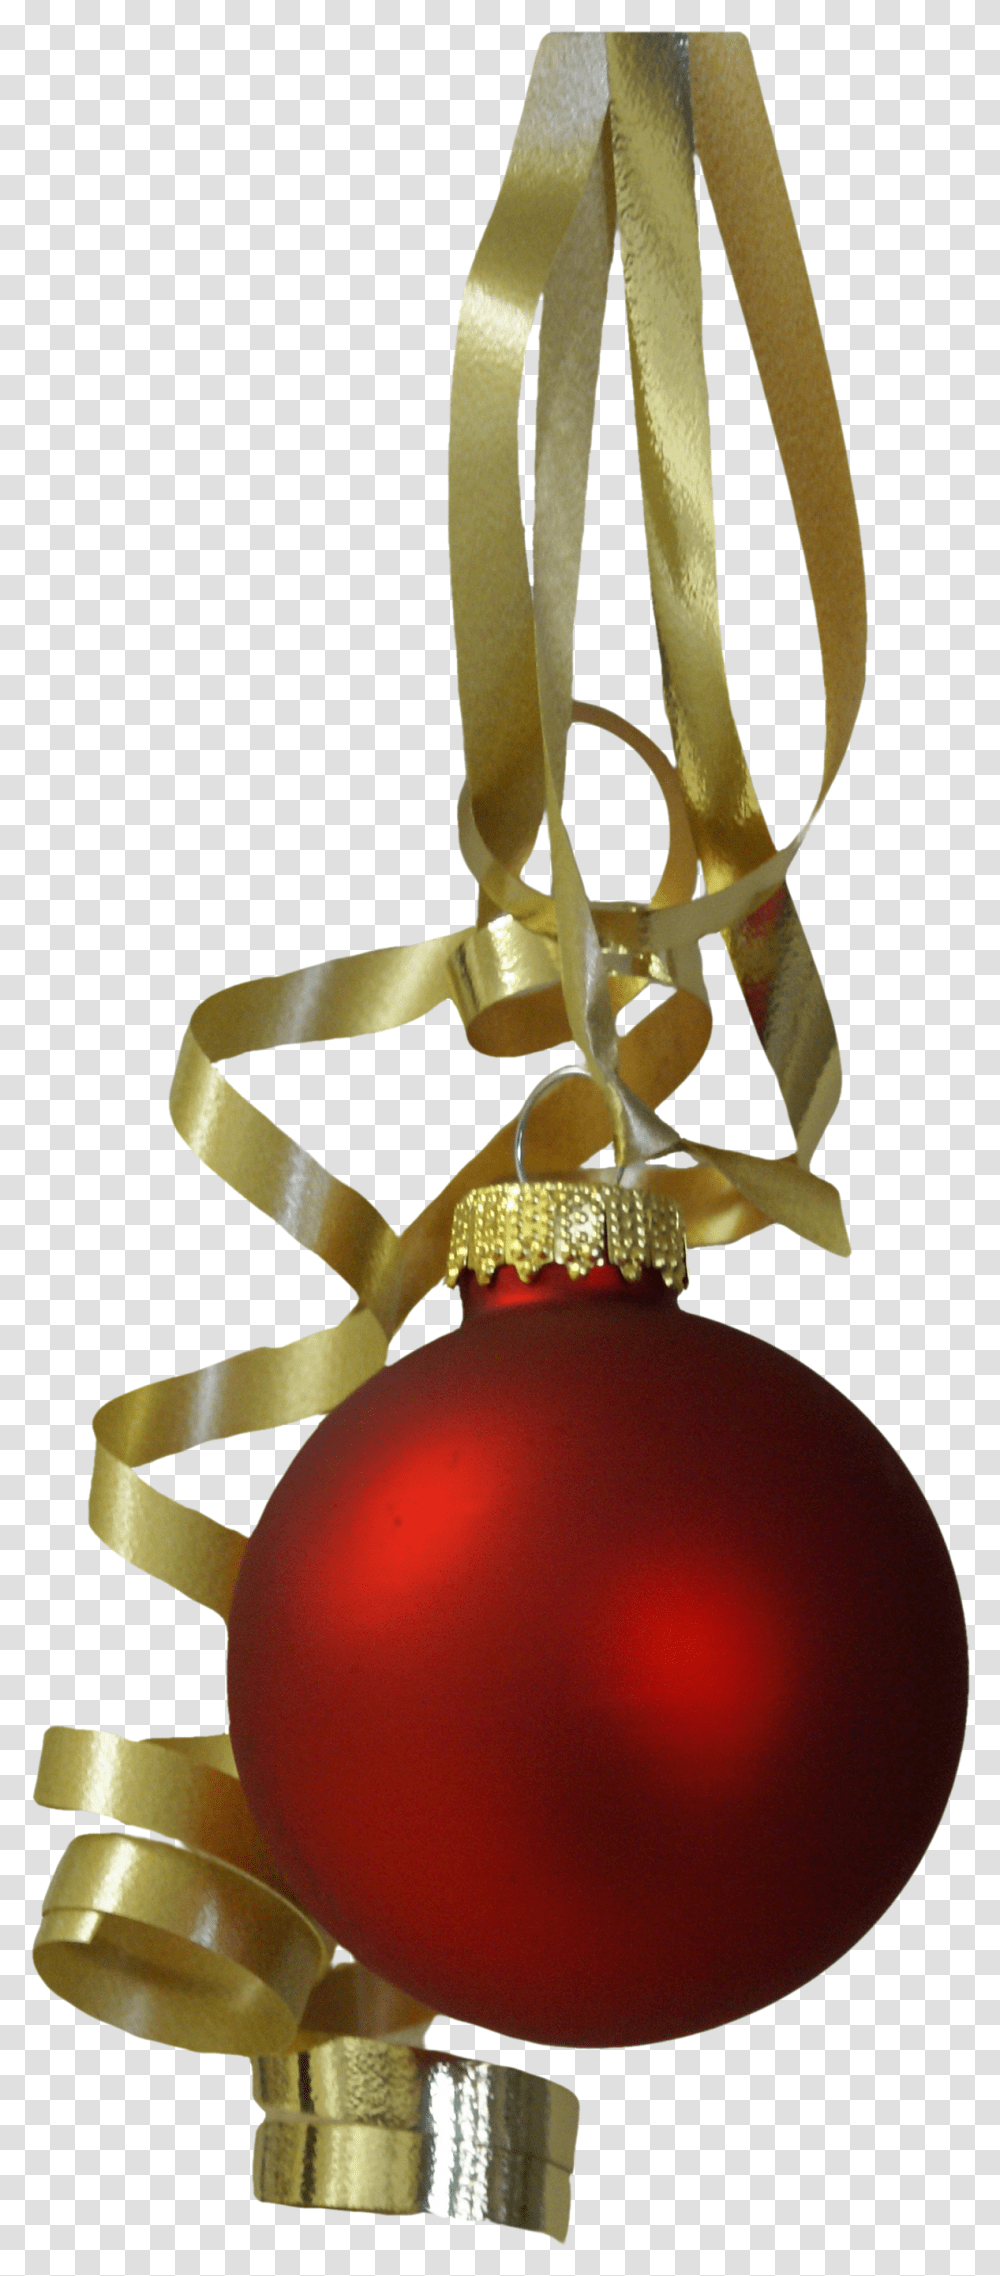 Christmas Ornaments Backgrounds Clip Ornaments And Ribbon, Lamp Transparent Png